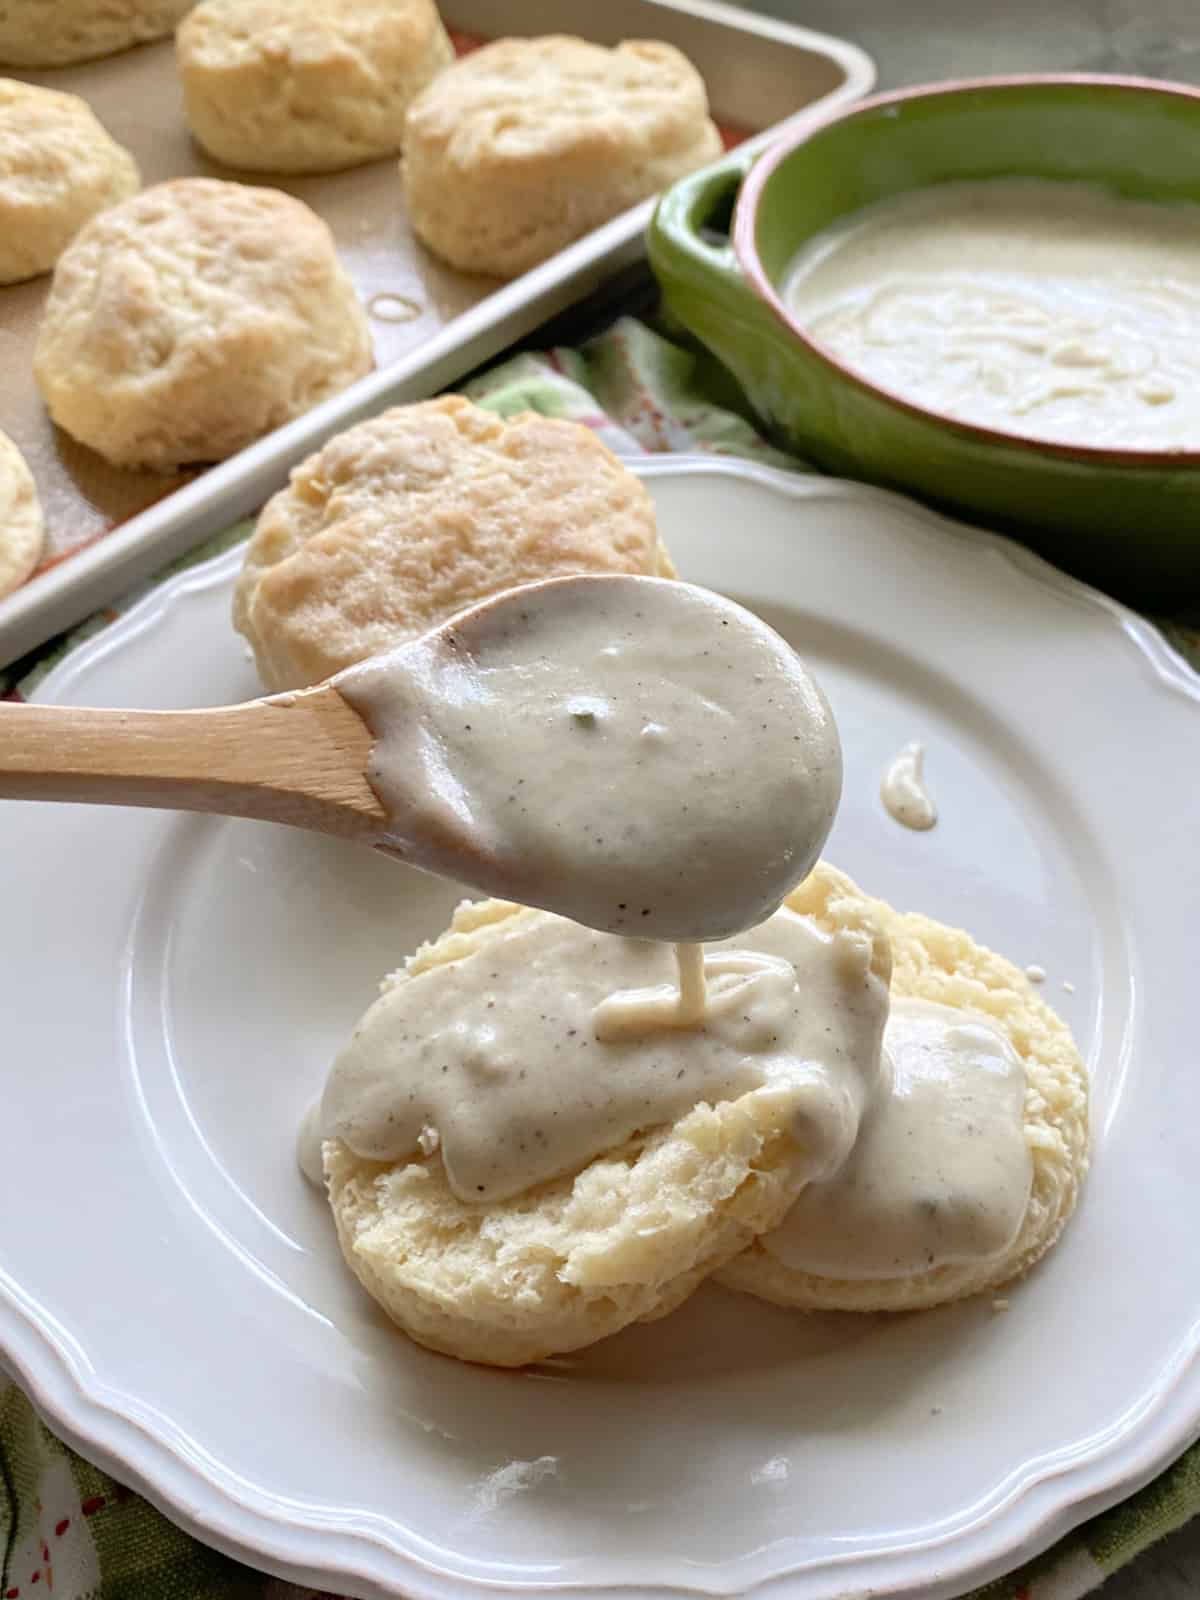 Wooden spoon drizzling white gravy on top of a biscuit.